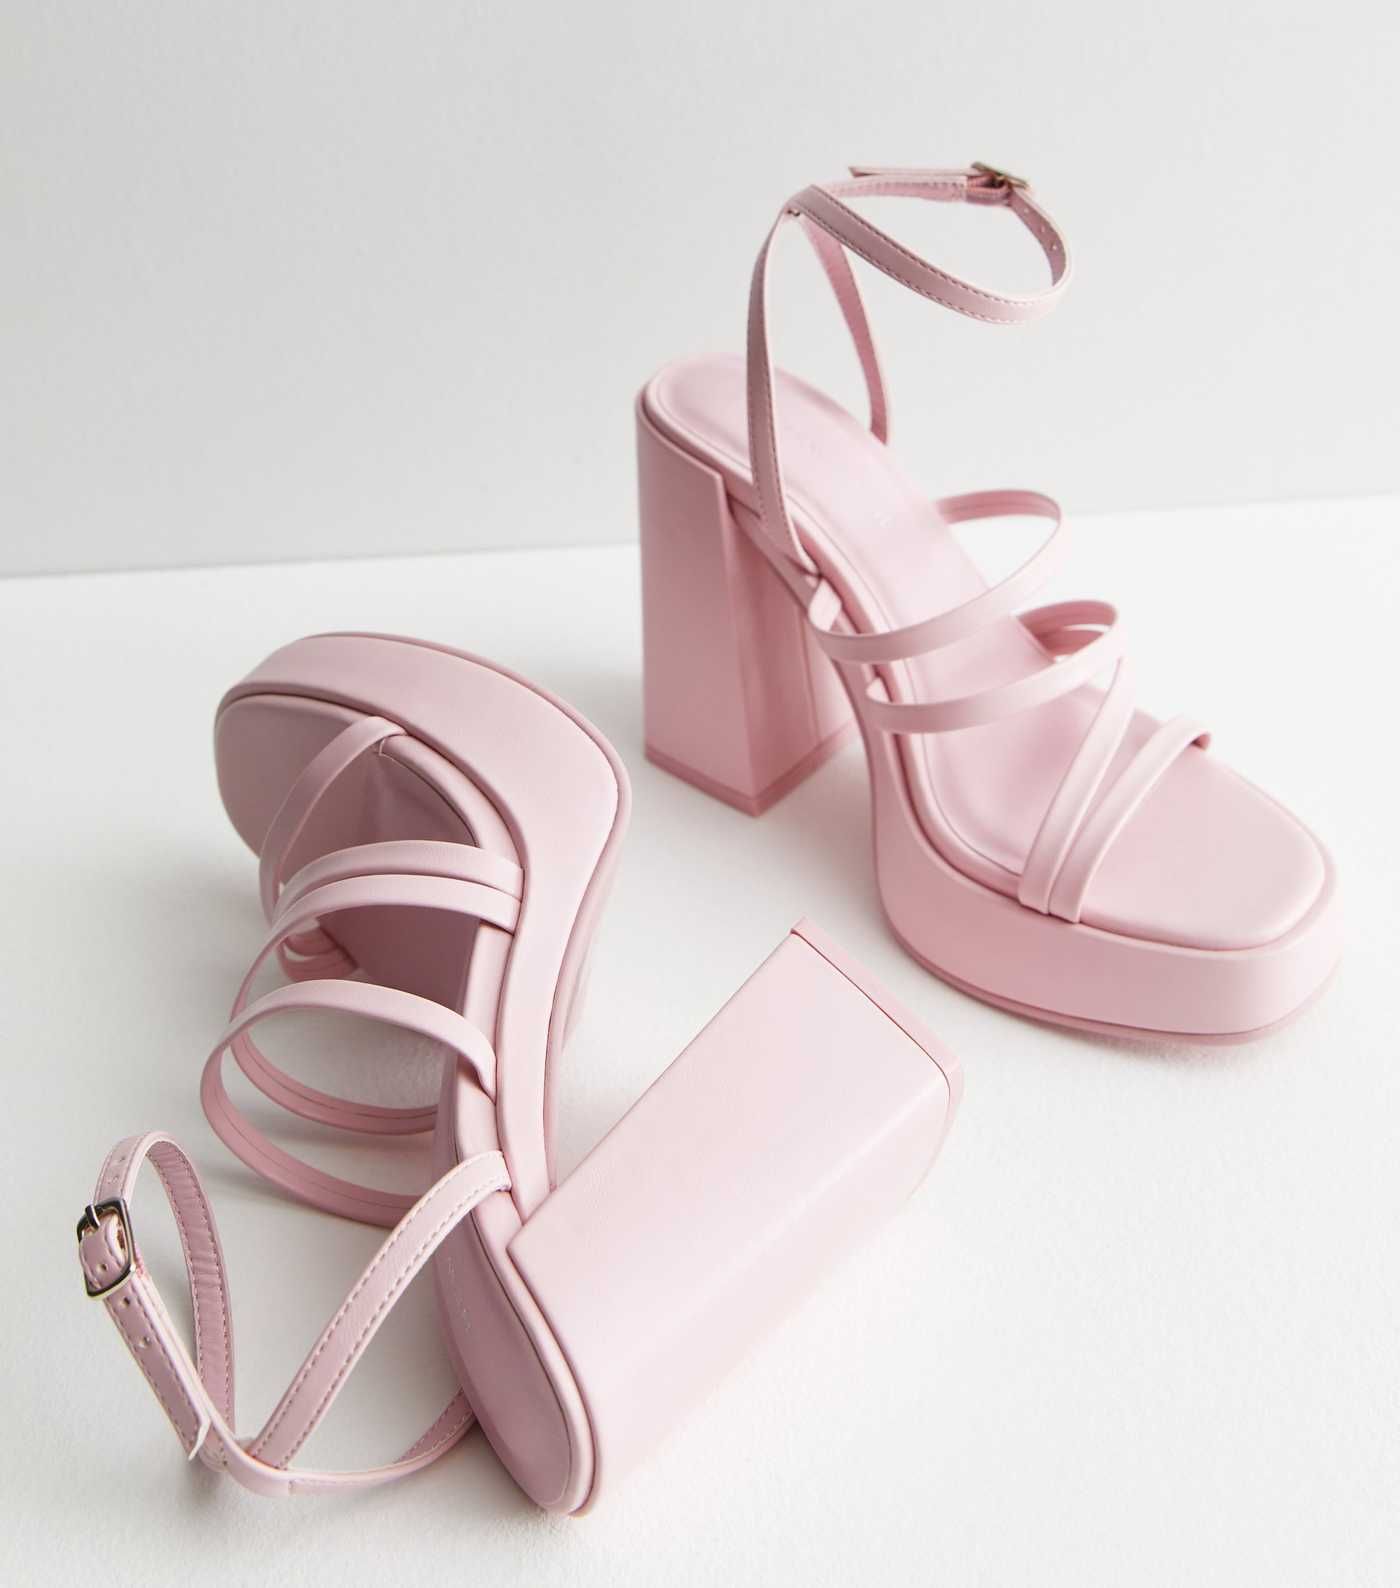 Pink Leather-Look Strappy Platform Block Heel Sandals
						
						Add to Saved Items
						Remov... | New Look (UK)